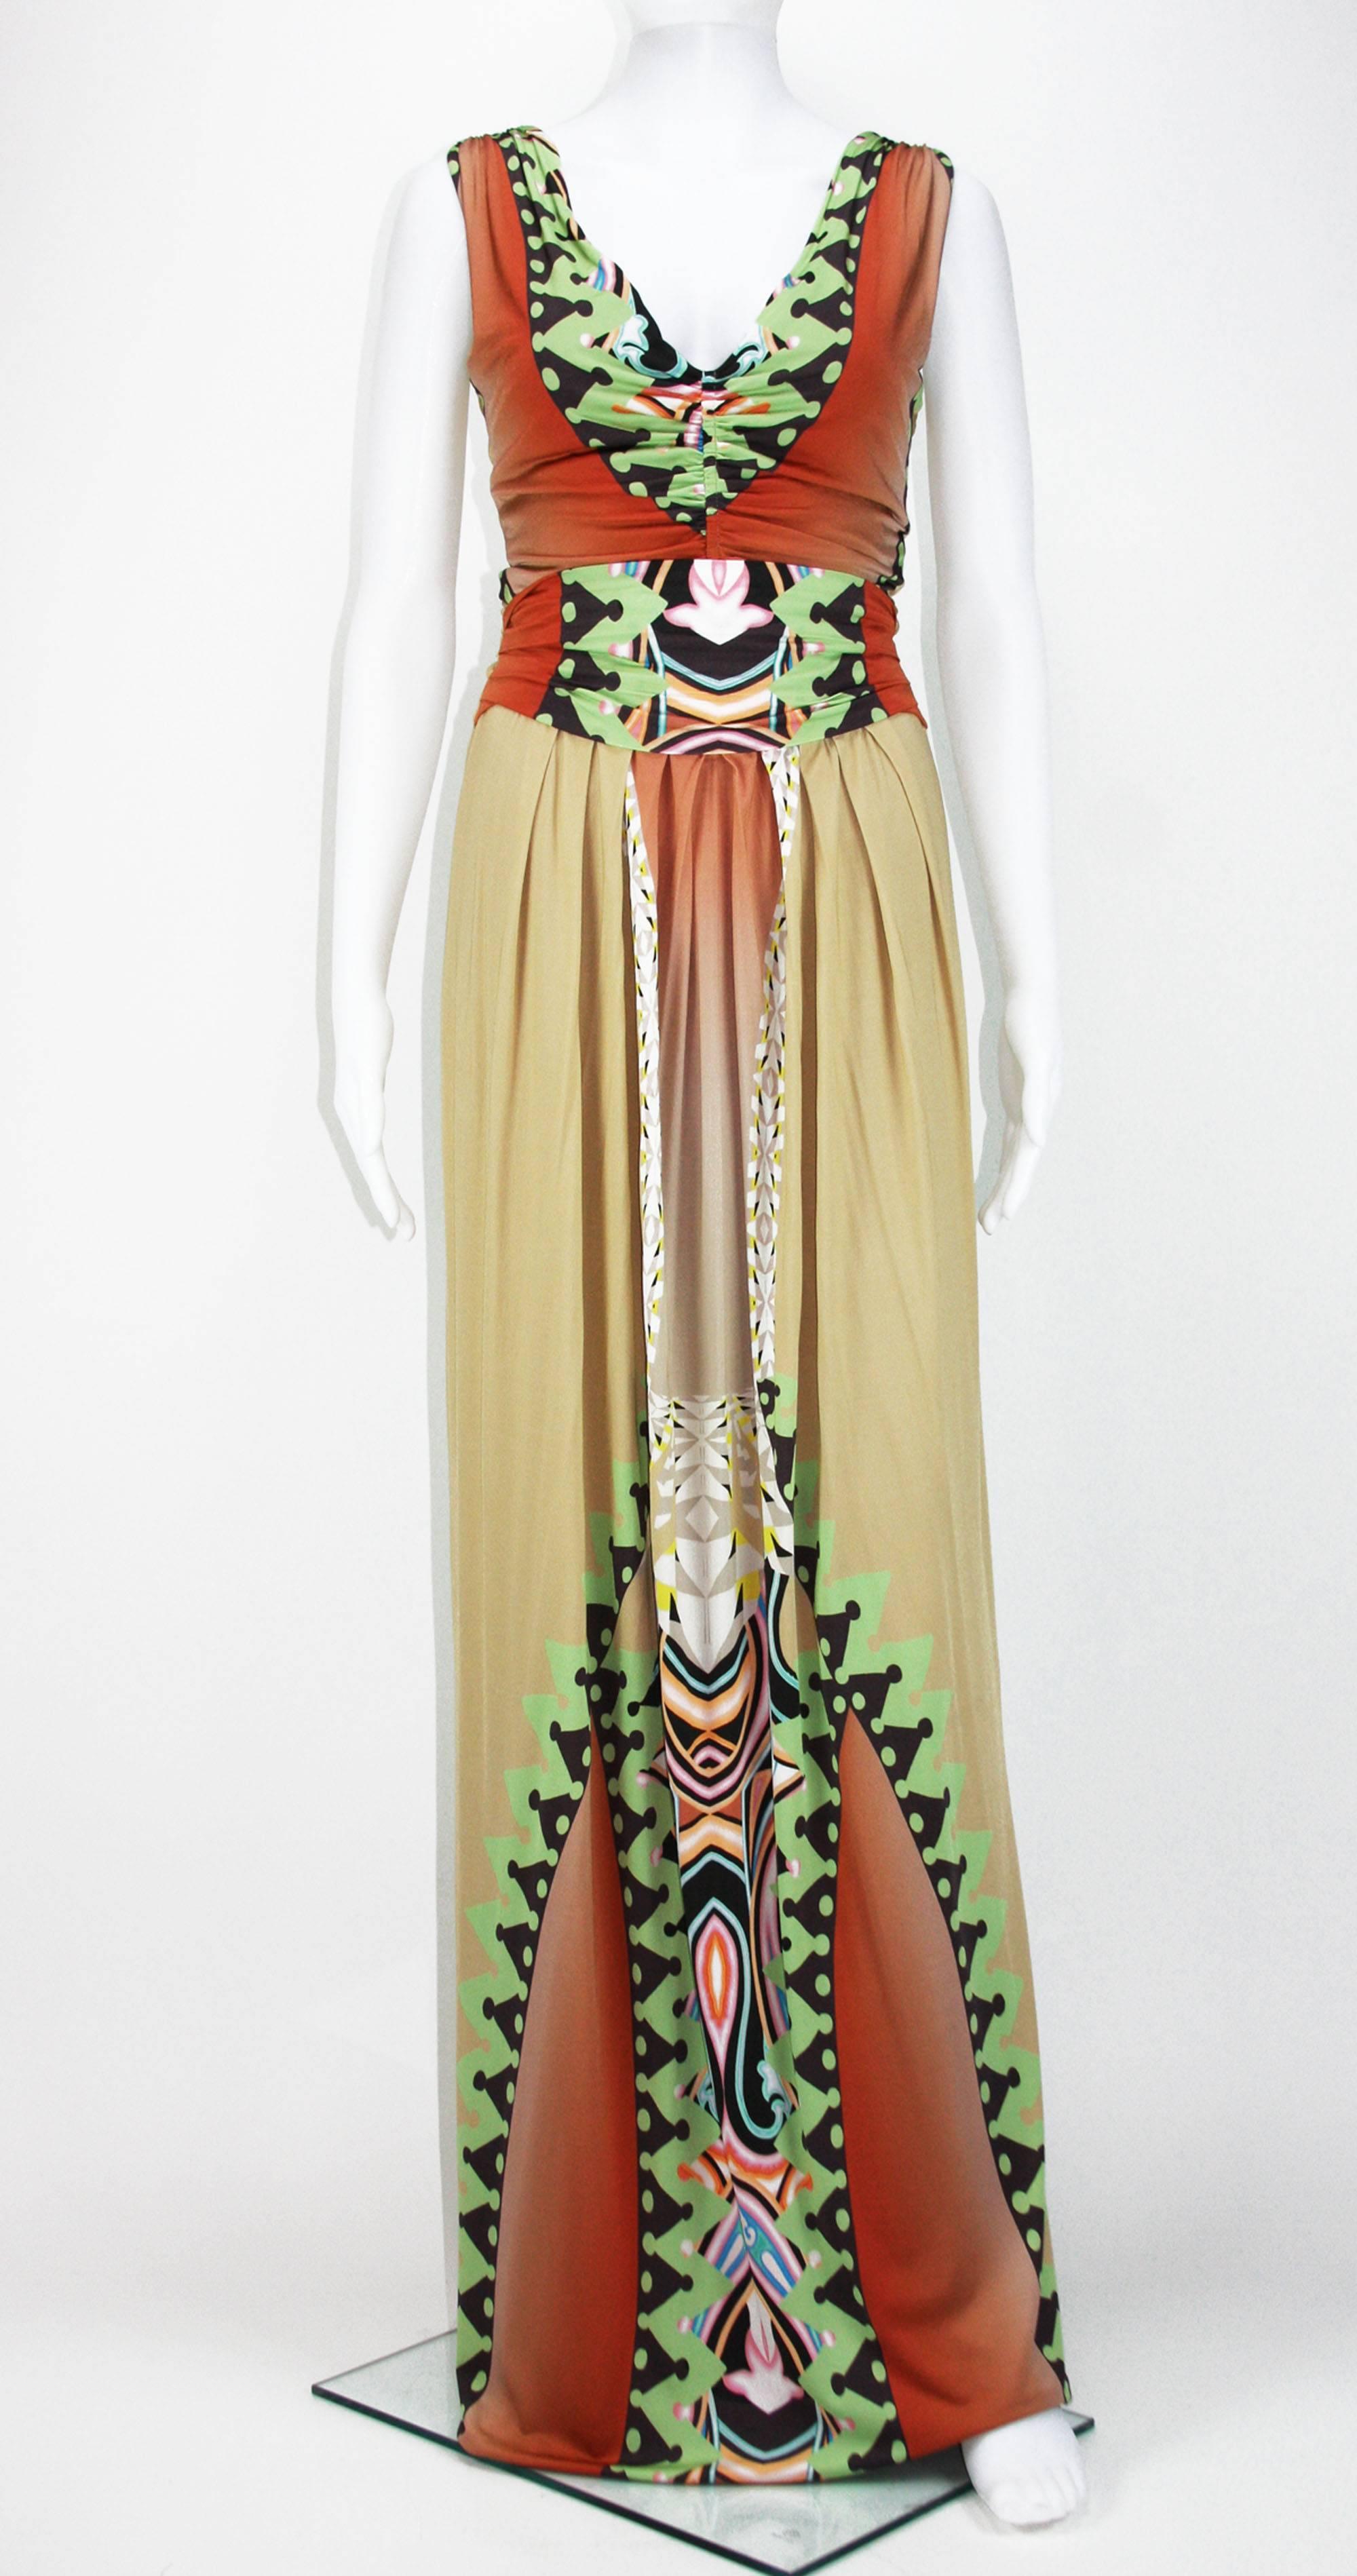 New ETRO Maxi Jersey Evening Dress
Italian Sizes Available 40,42 - US 4,6.
Multi-Colored
Super Stretch Jersey - 92% Viscosa, 8% Elastane
Gathered Top Panels
Non Detachable Belt
No Closure - Simple Sleeps On
Fully Lined - Viscose Jersey
Made in